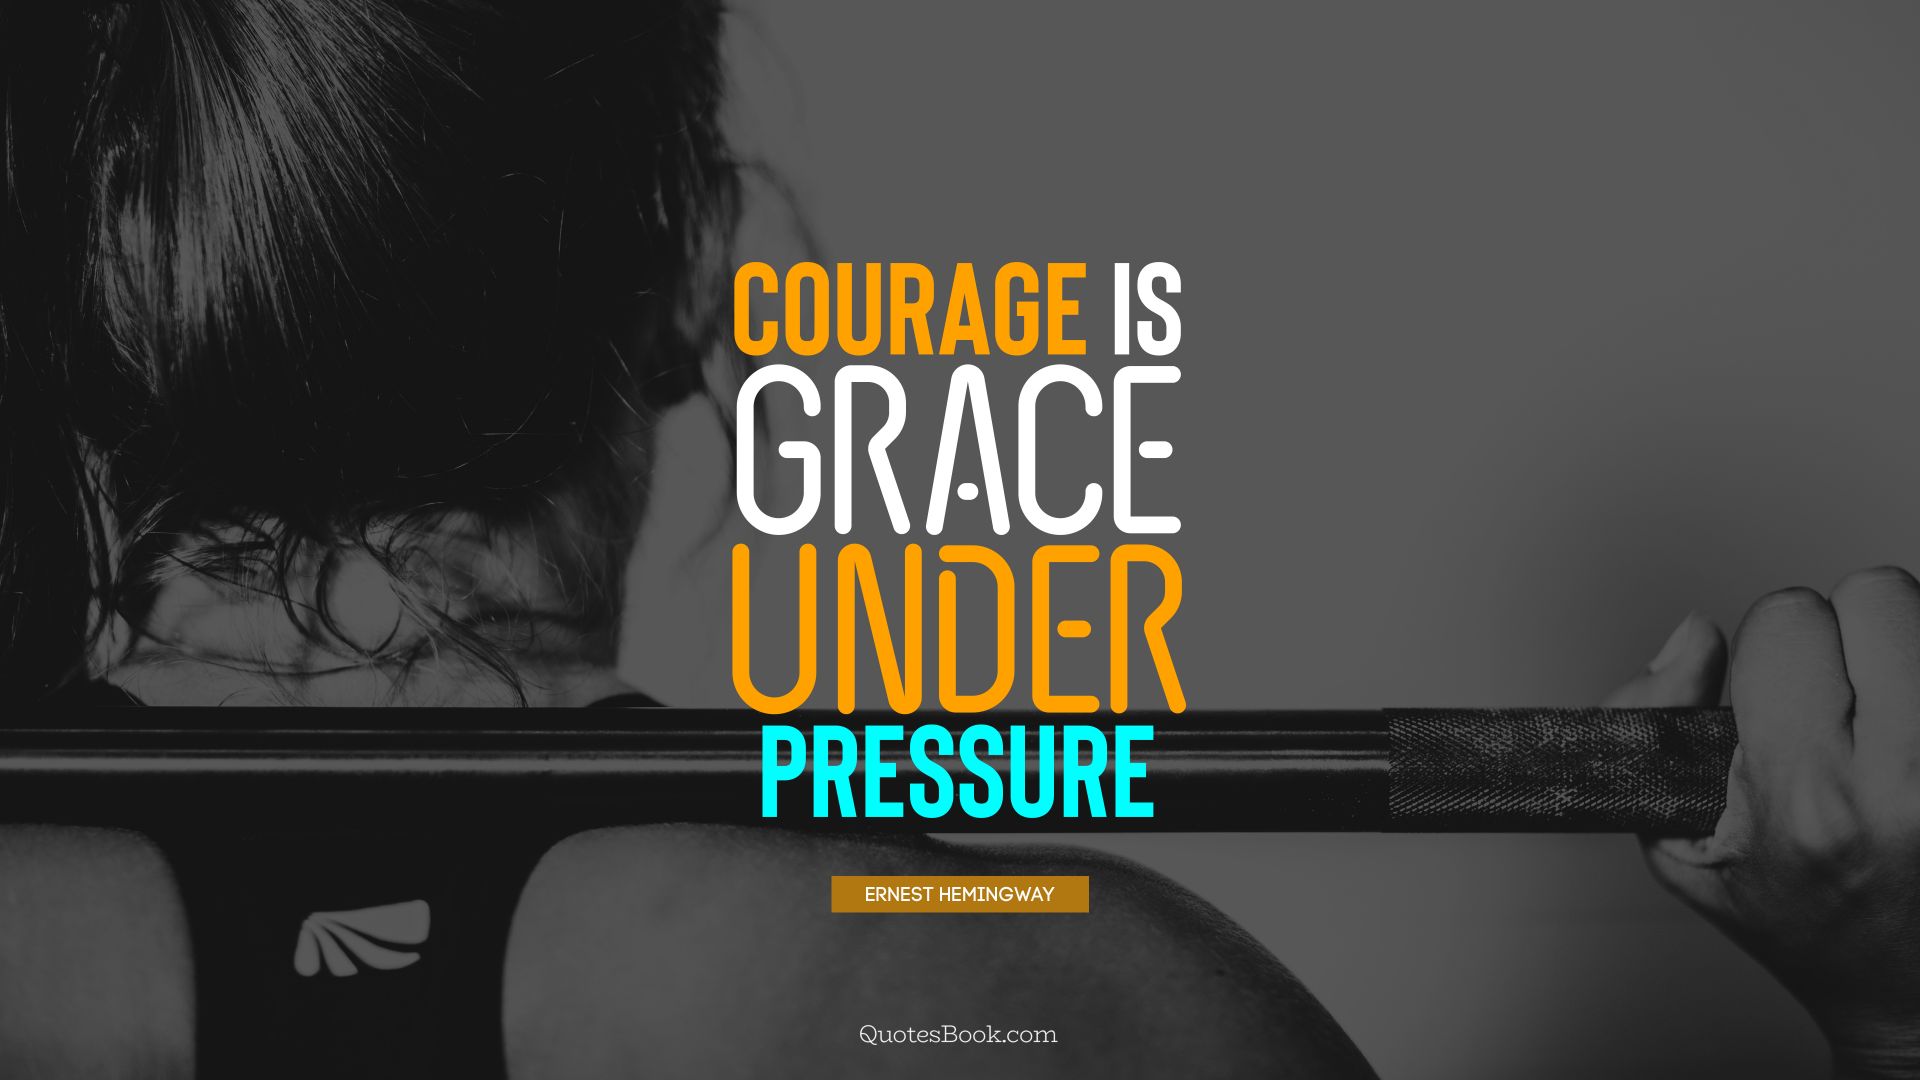 Courage is grace under pressure. - Quote by Ernest Hemingway